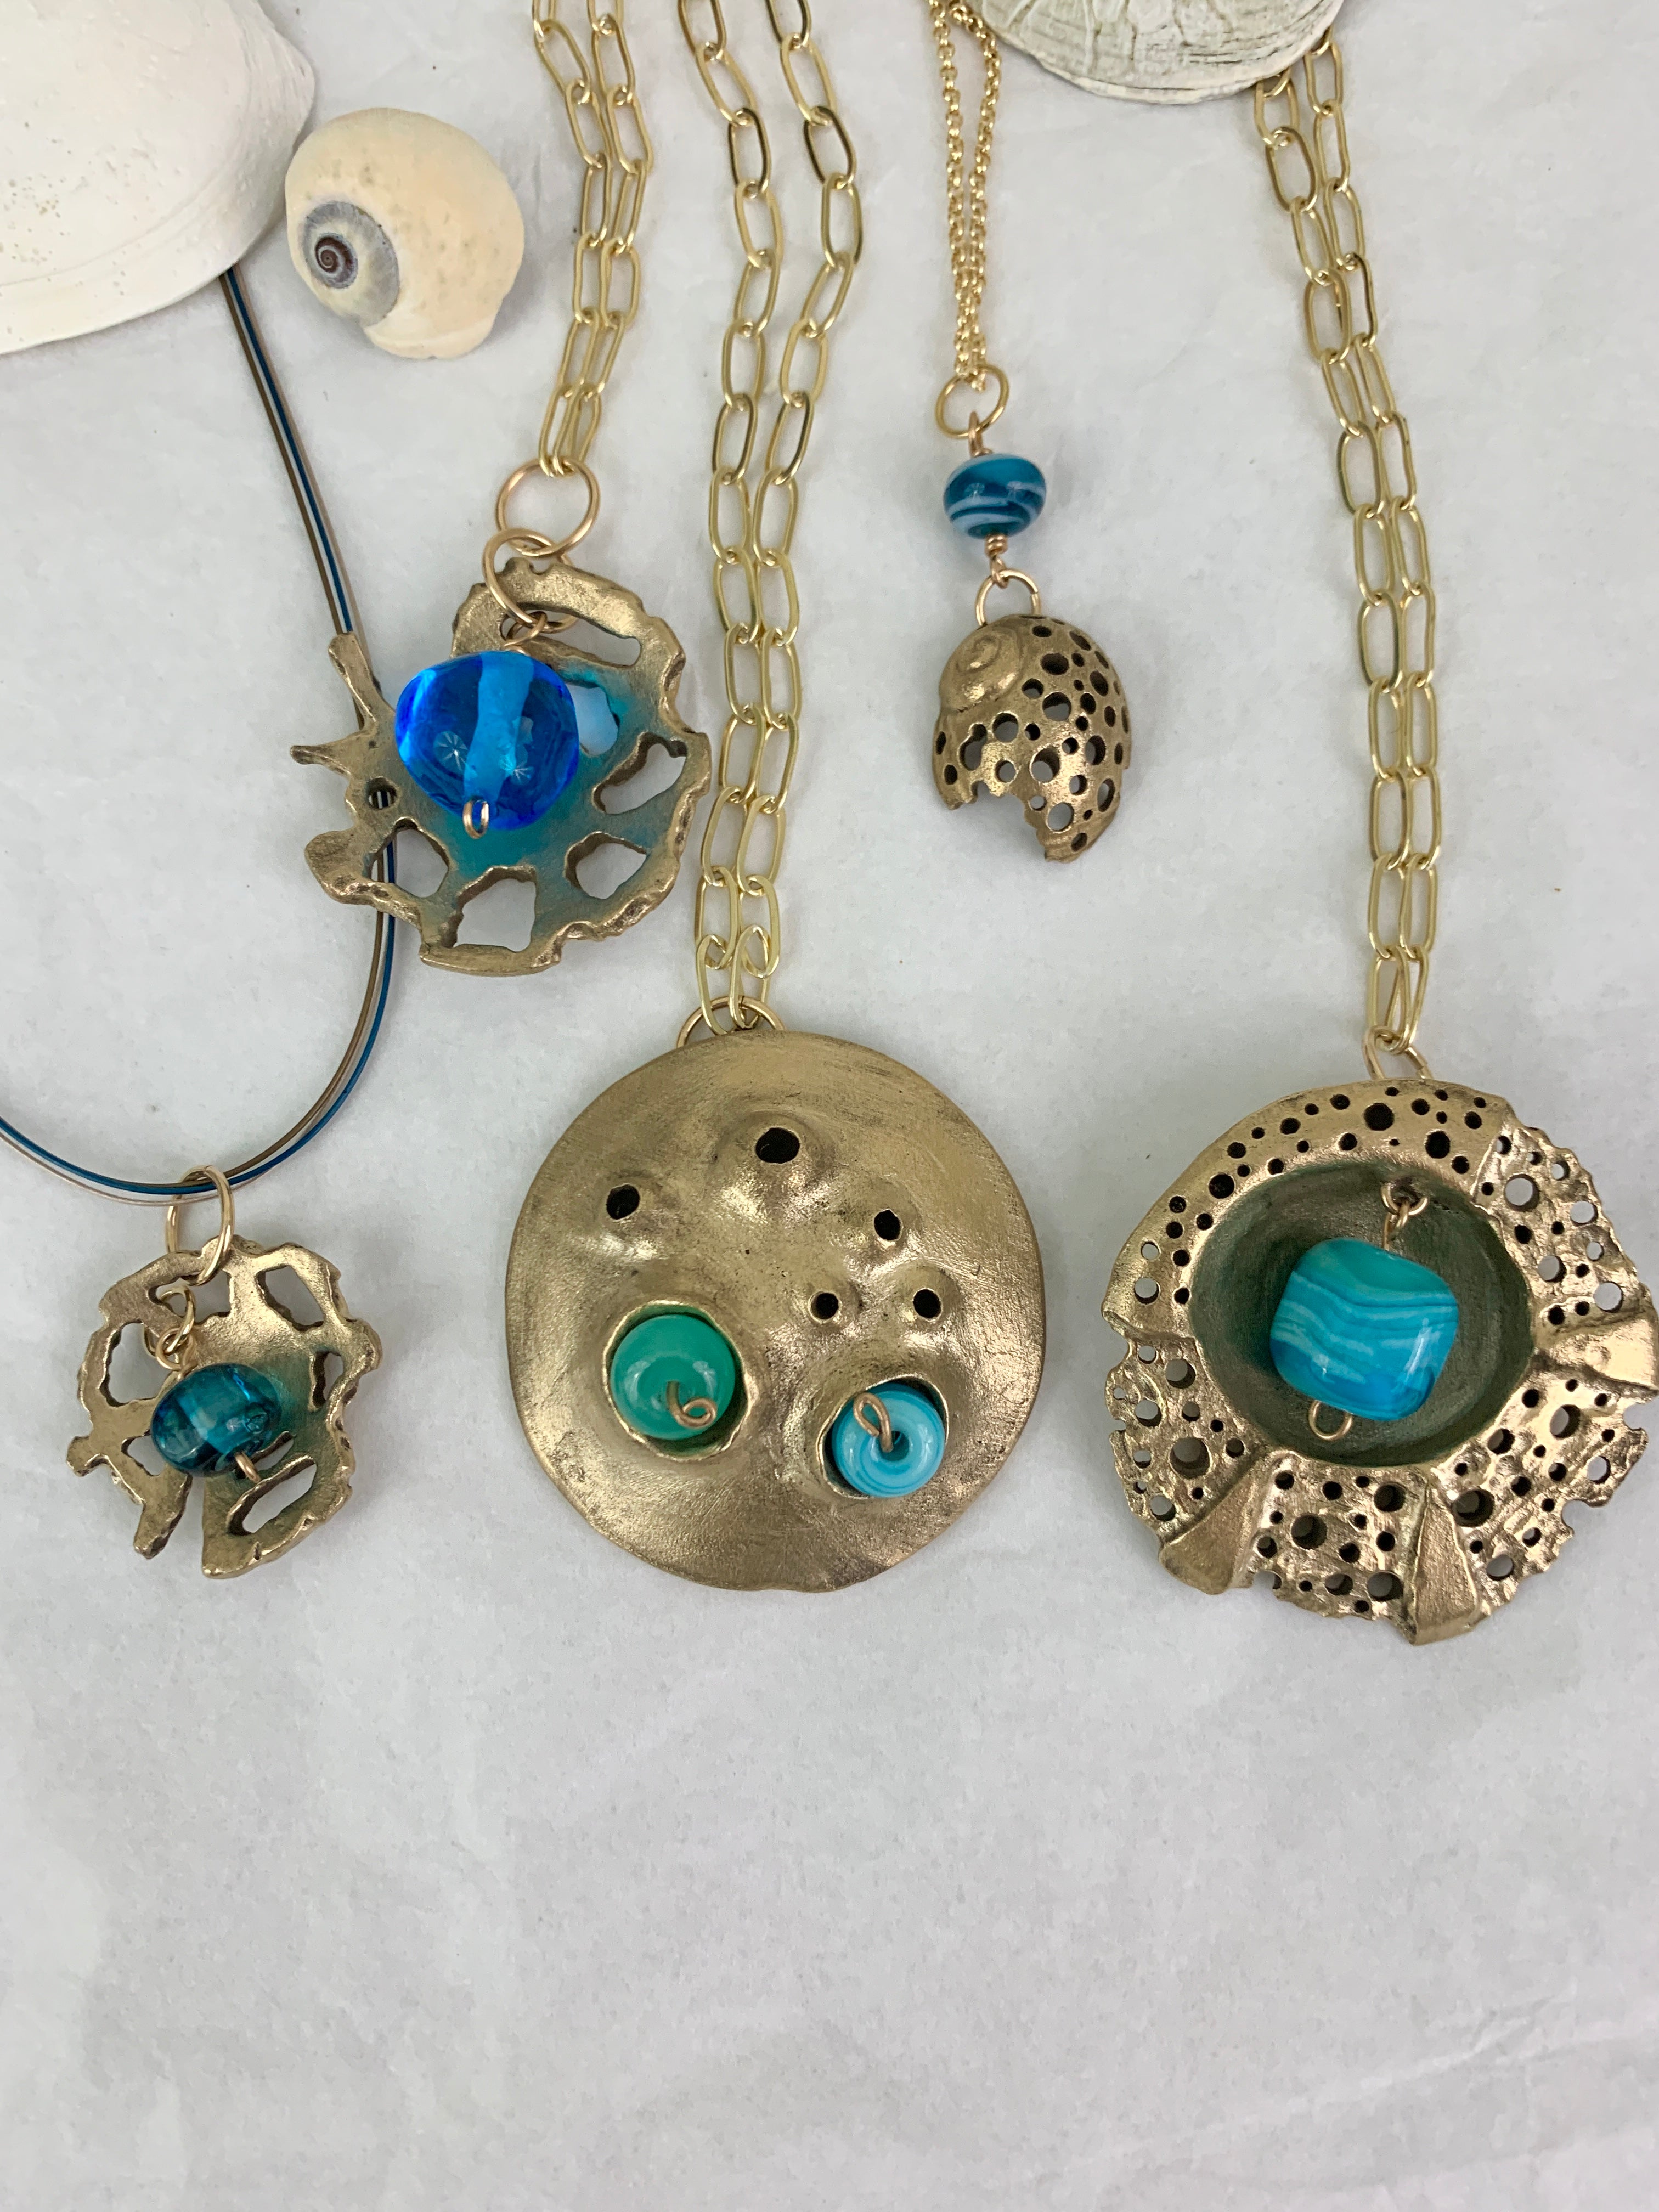 Ocean inspired bronze handmade one of a kind necklaces